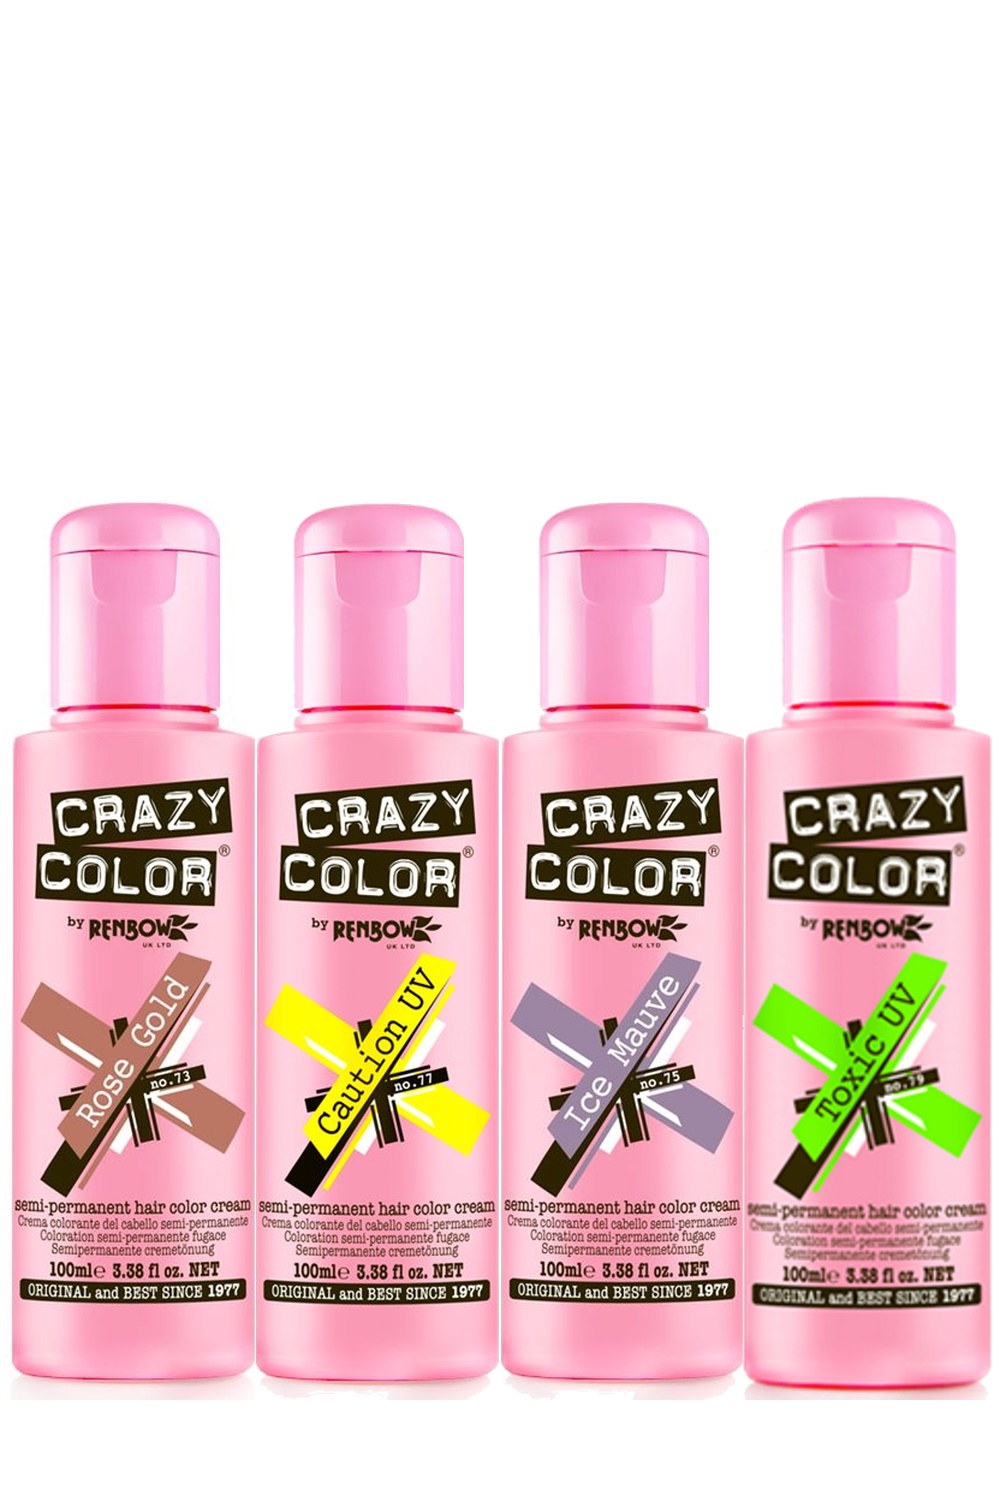 CRAZY COLOR SEMI PERMANENT HAIR DYE 100ml -All colours-Fast UK  Postage-!!!!!!!